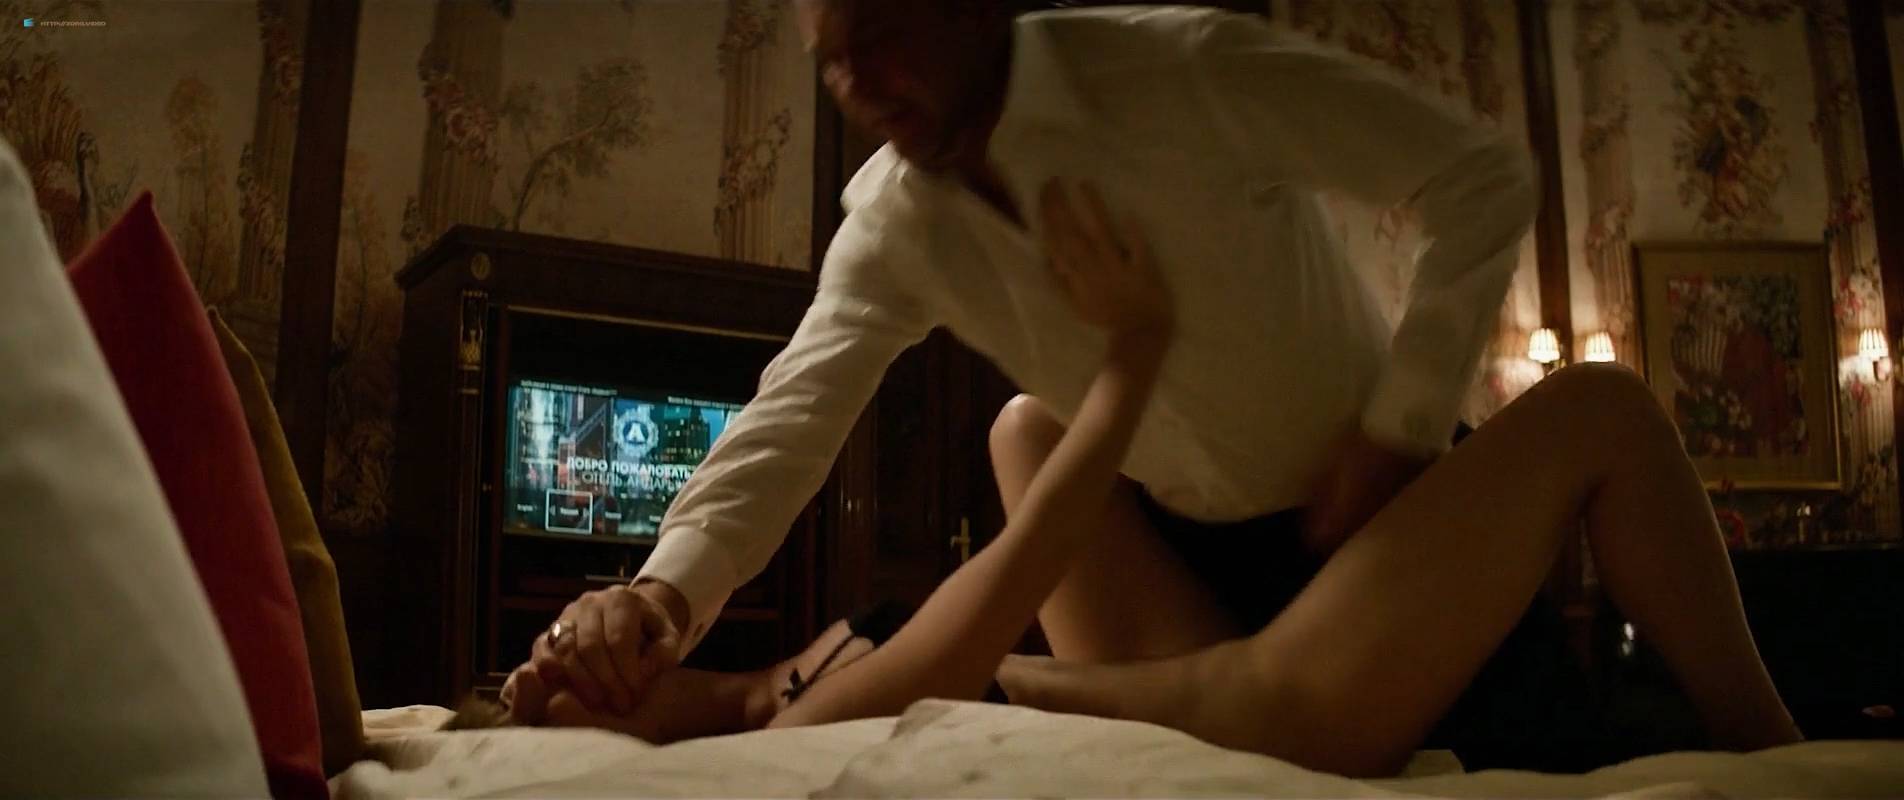 christopher conroy add photo jennifer lawrence red sparrow nudes